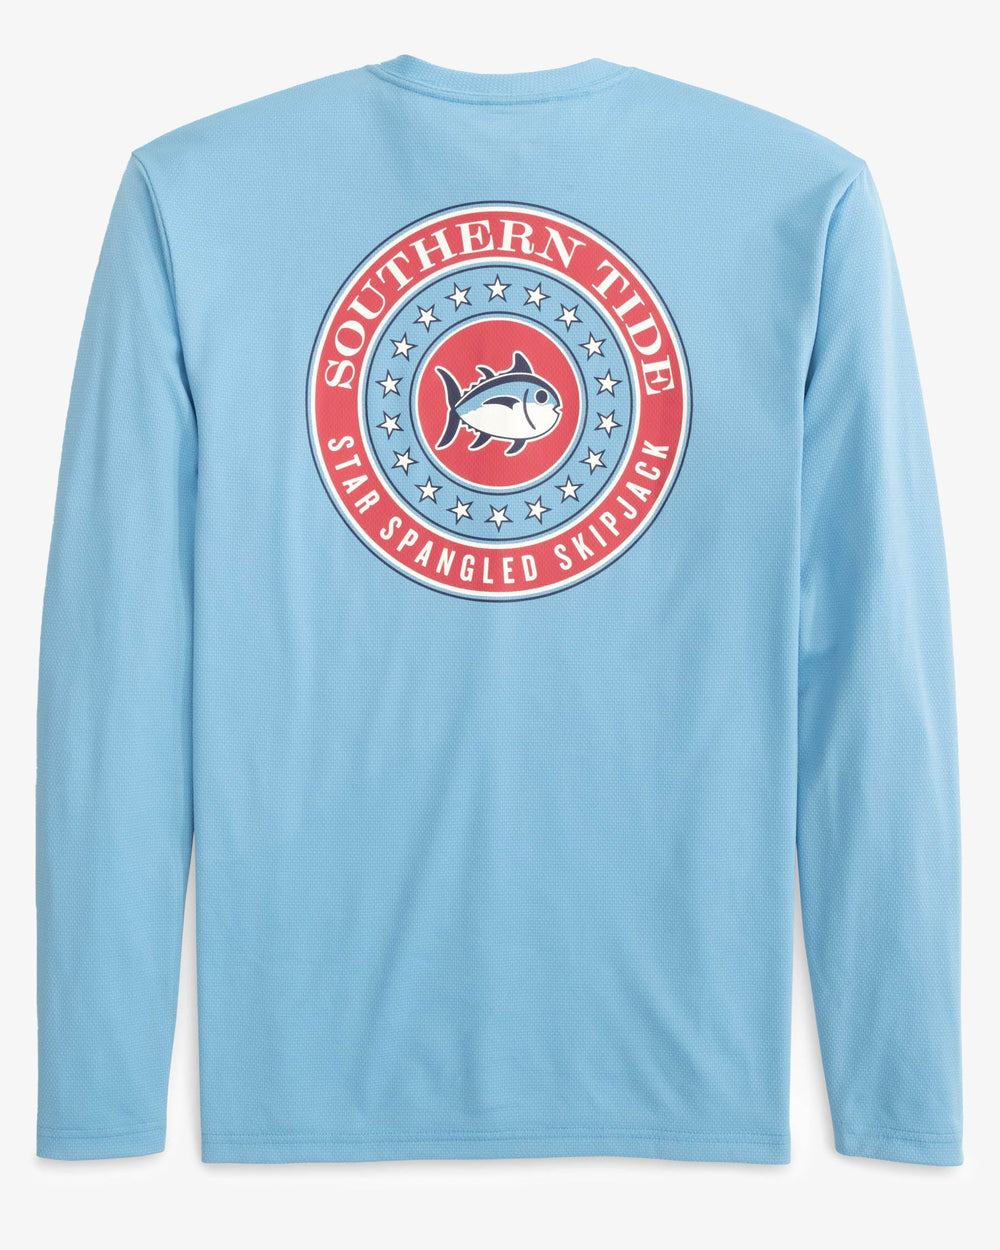 The back view of the Star Spangled Skipjack Long Sleeve Performance T-Shirt by Southern Tide - Heritage Blue